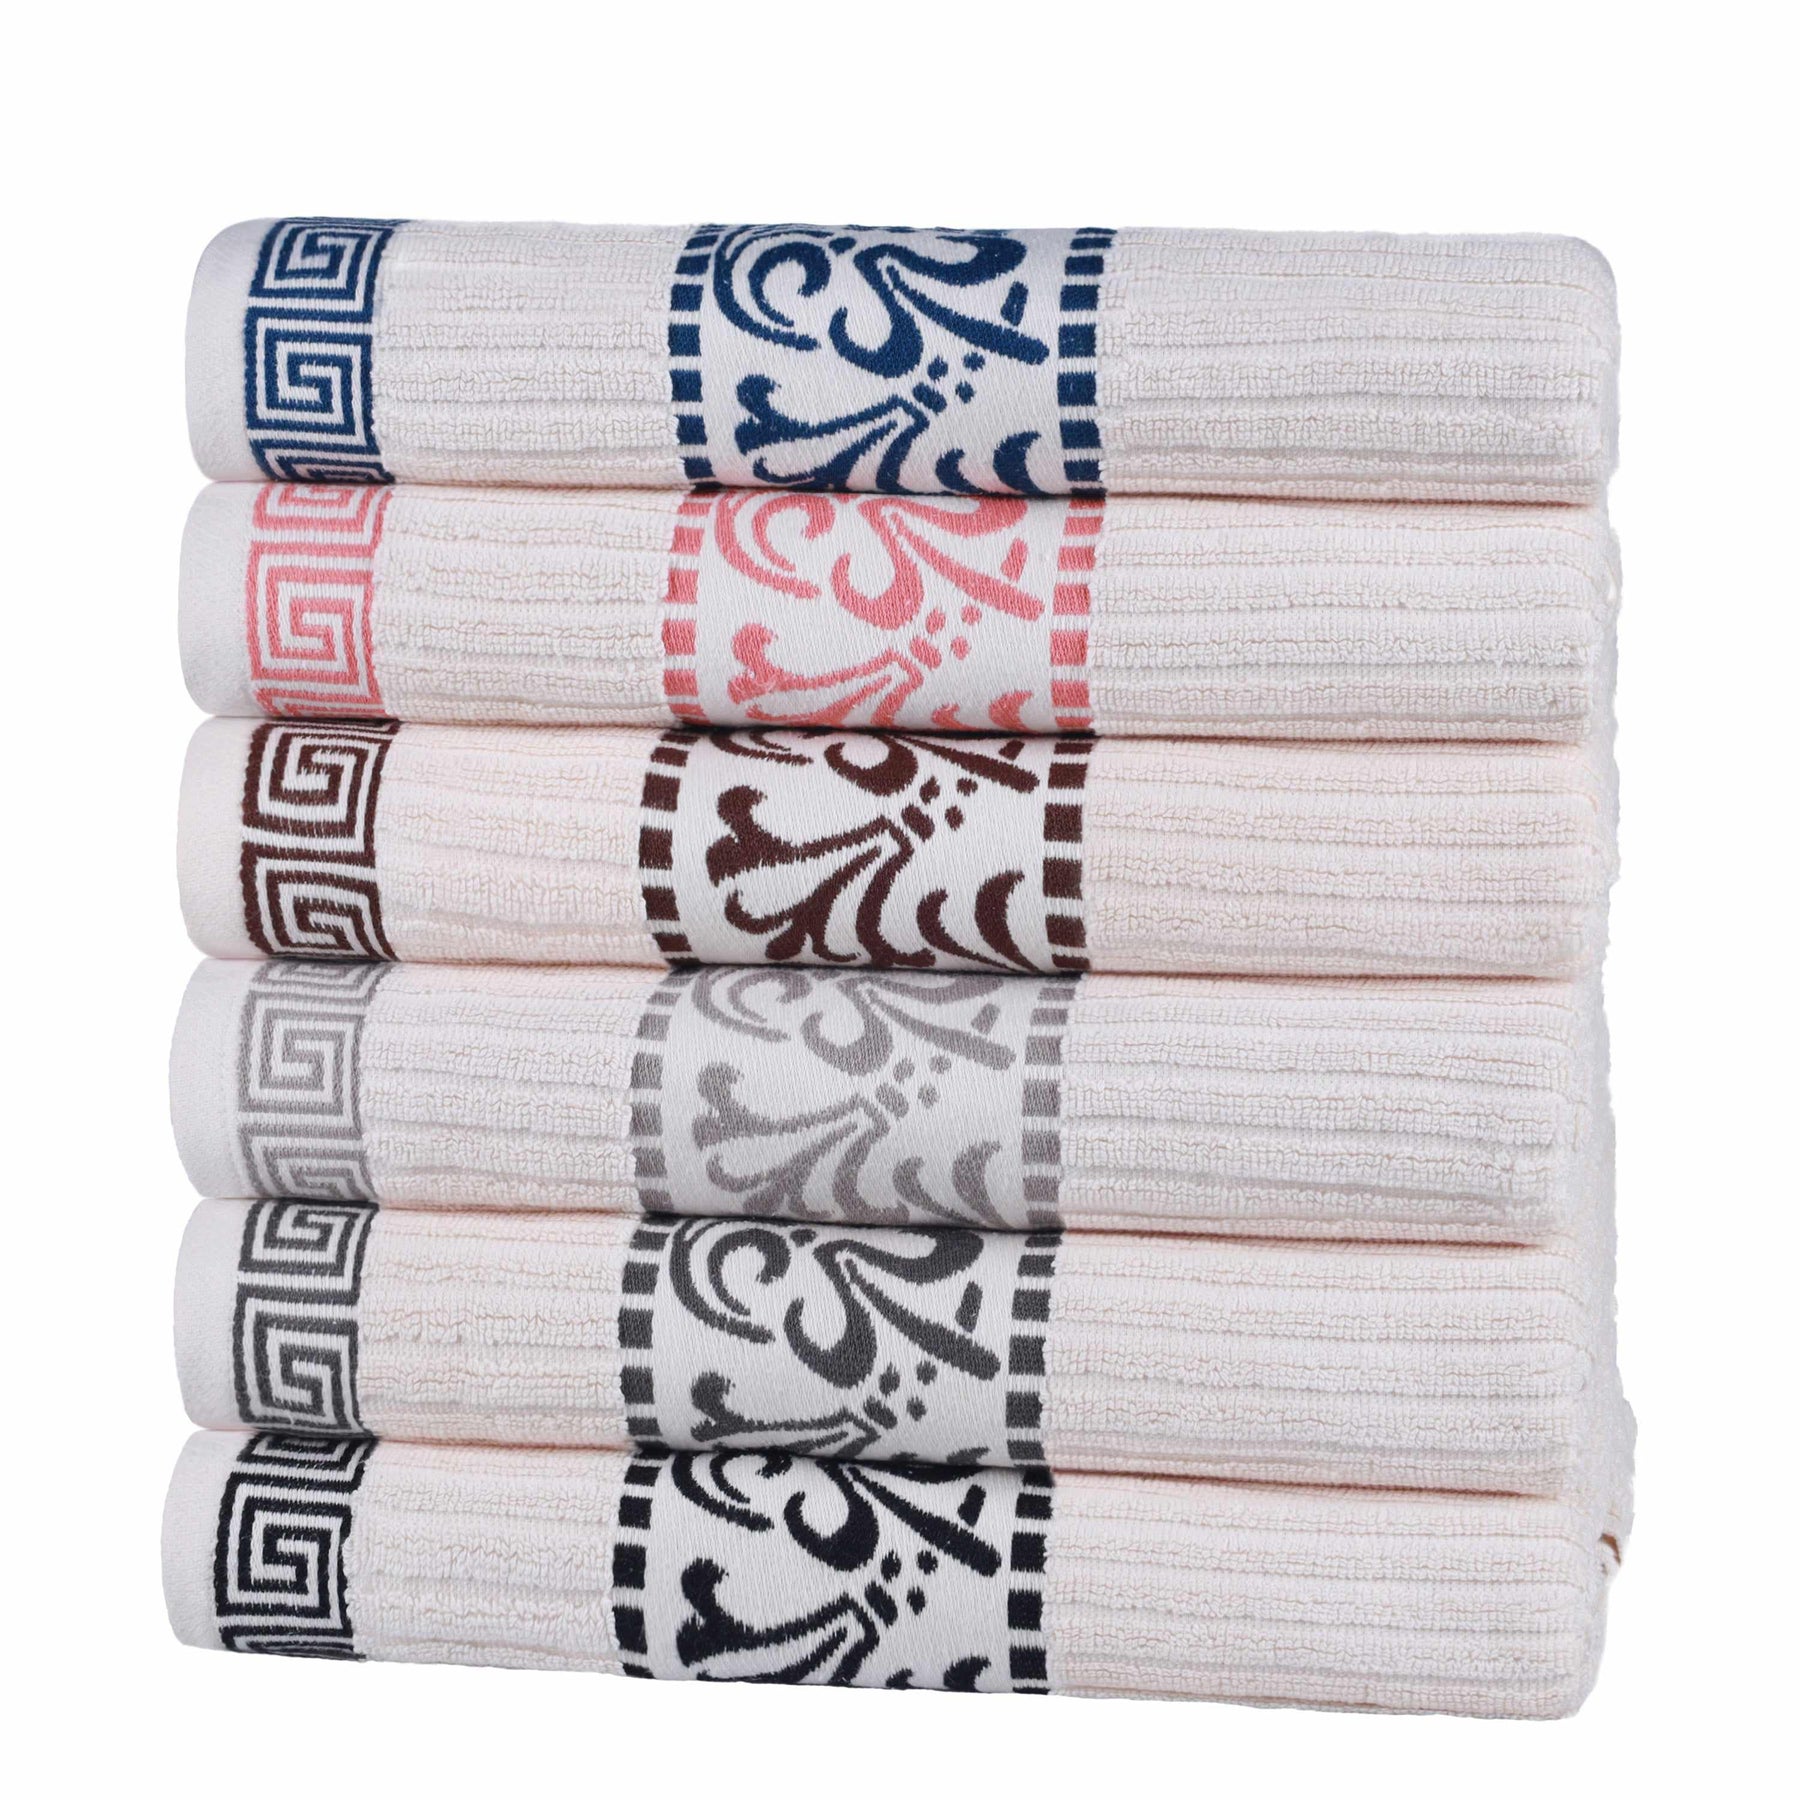  Superior Athens Cotton 8-Piece Towel Set with Greek Scroll and Floral Pattern - White-Navy